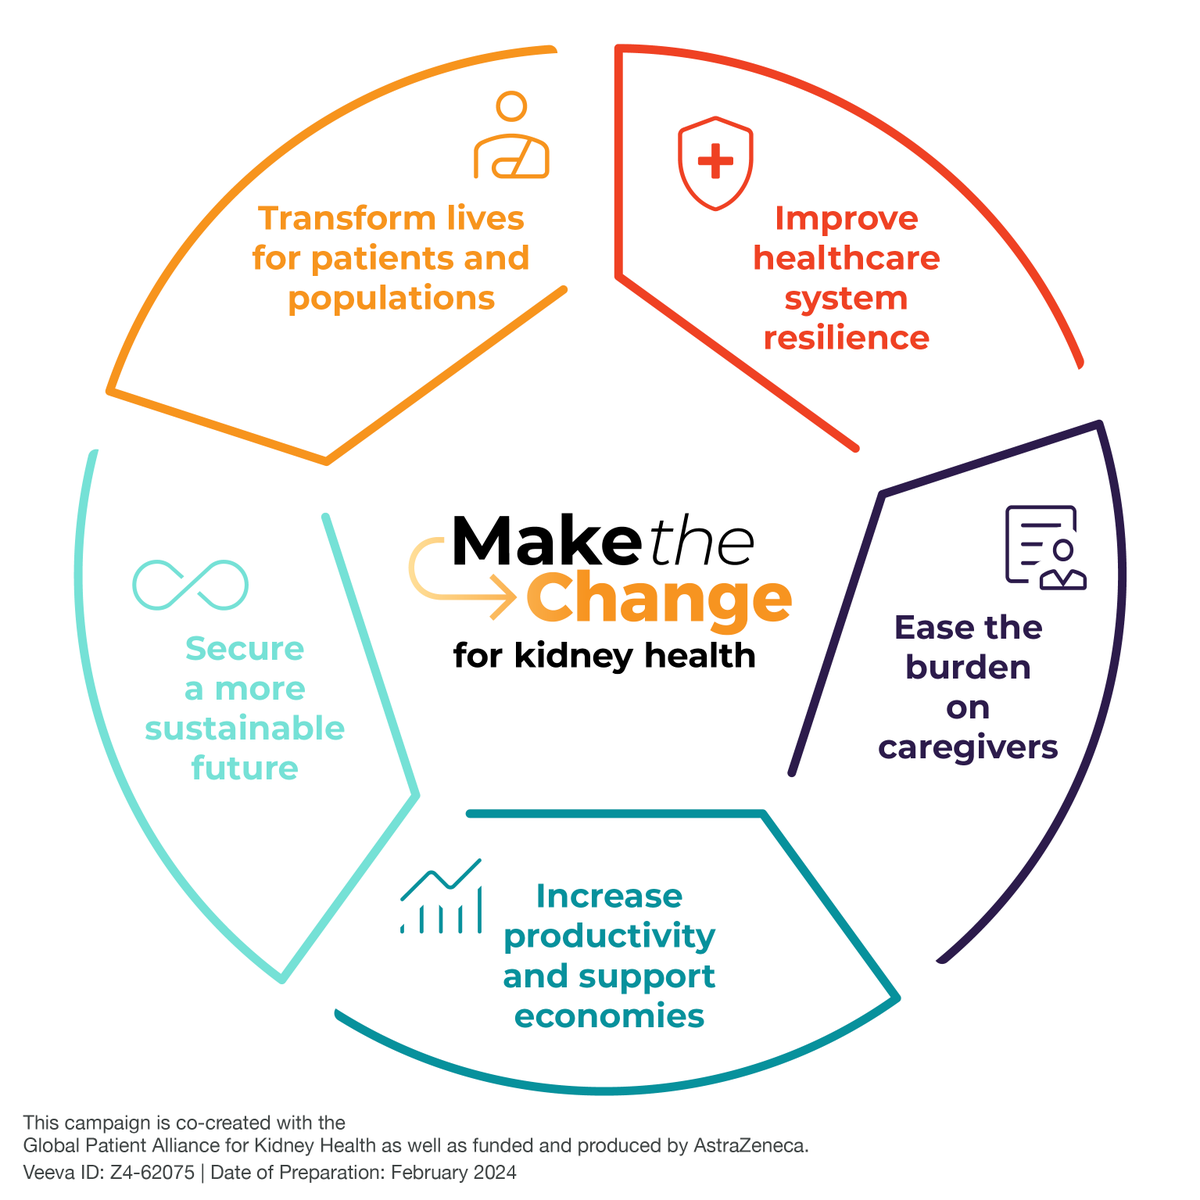 #DYK? Making a change #ForKidneyHealth will:

👥 Transform lives for #CKD patients and populations
🏥 Improve health care system resilience
🤝 Ease the burden on caregivers
📈 Increase productivity to support economies
🔋 Secure a more sustainable future

ChangeForKidneyHealth.com